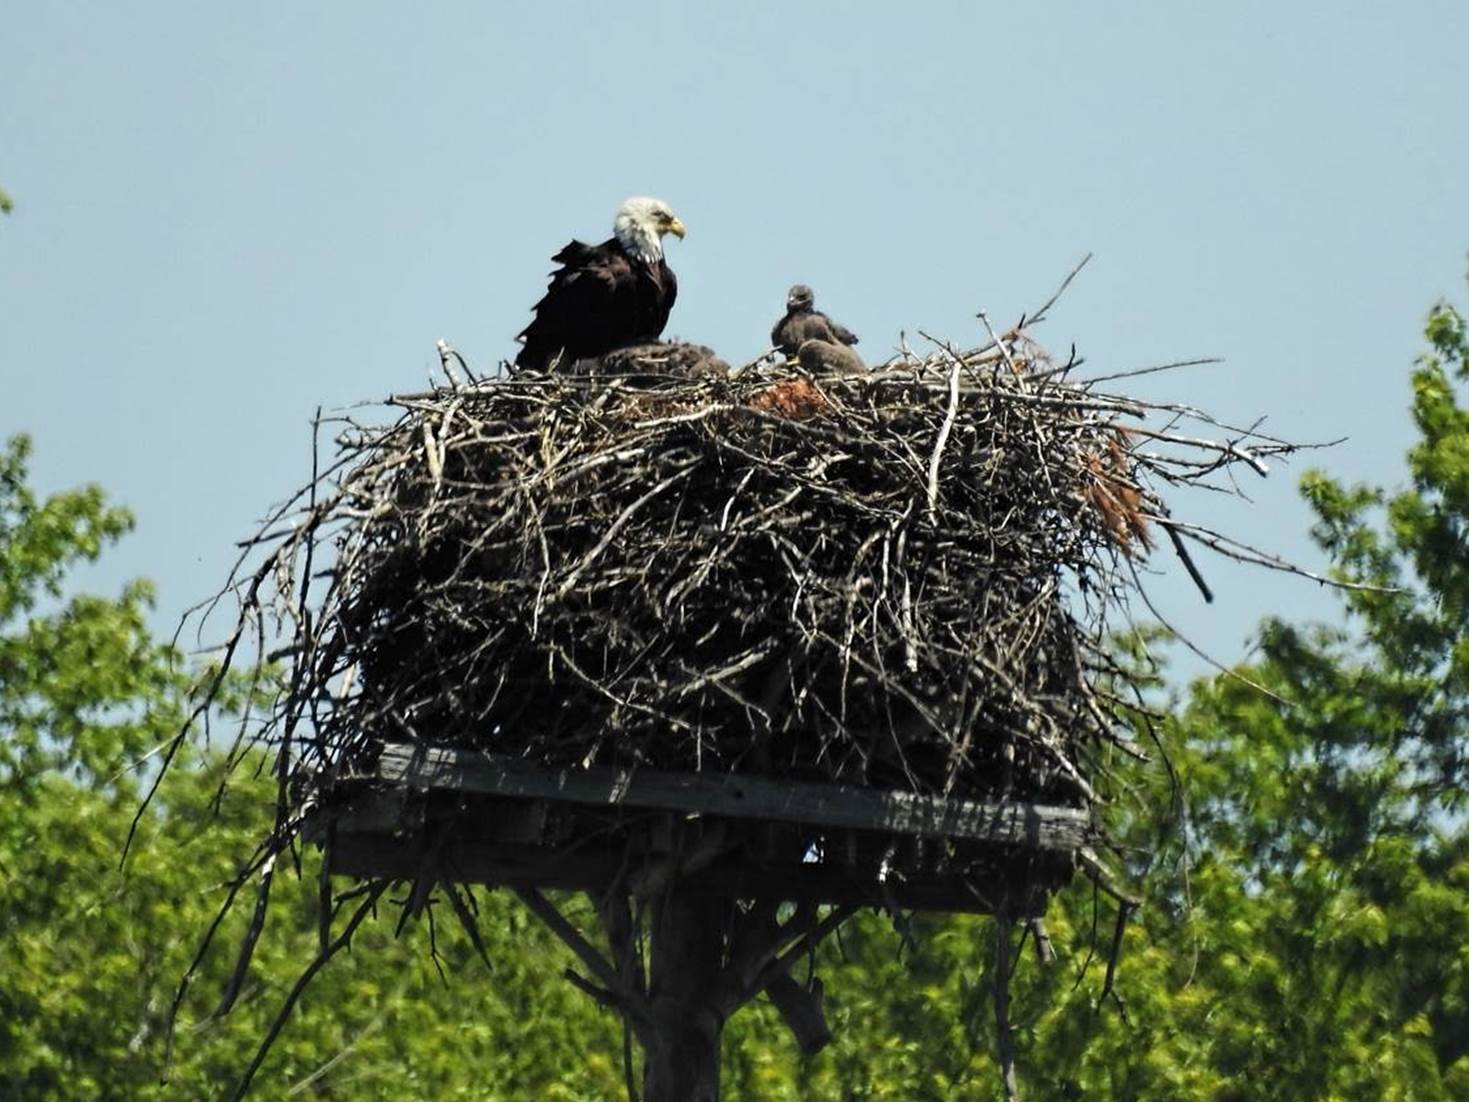 Adult bald eagle with two eaglets on a nest